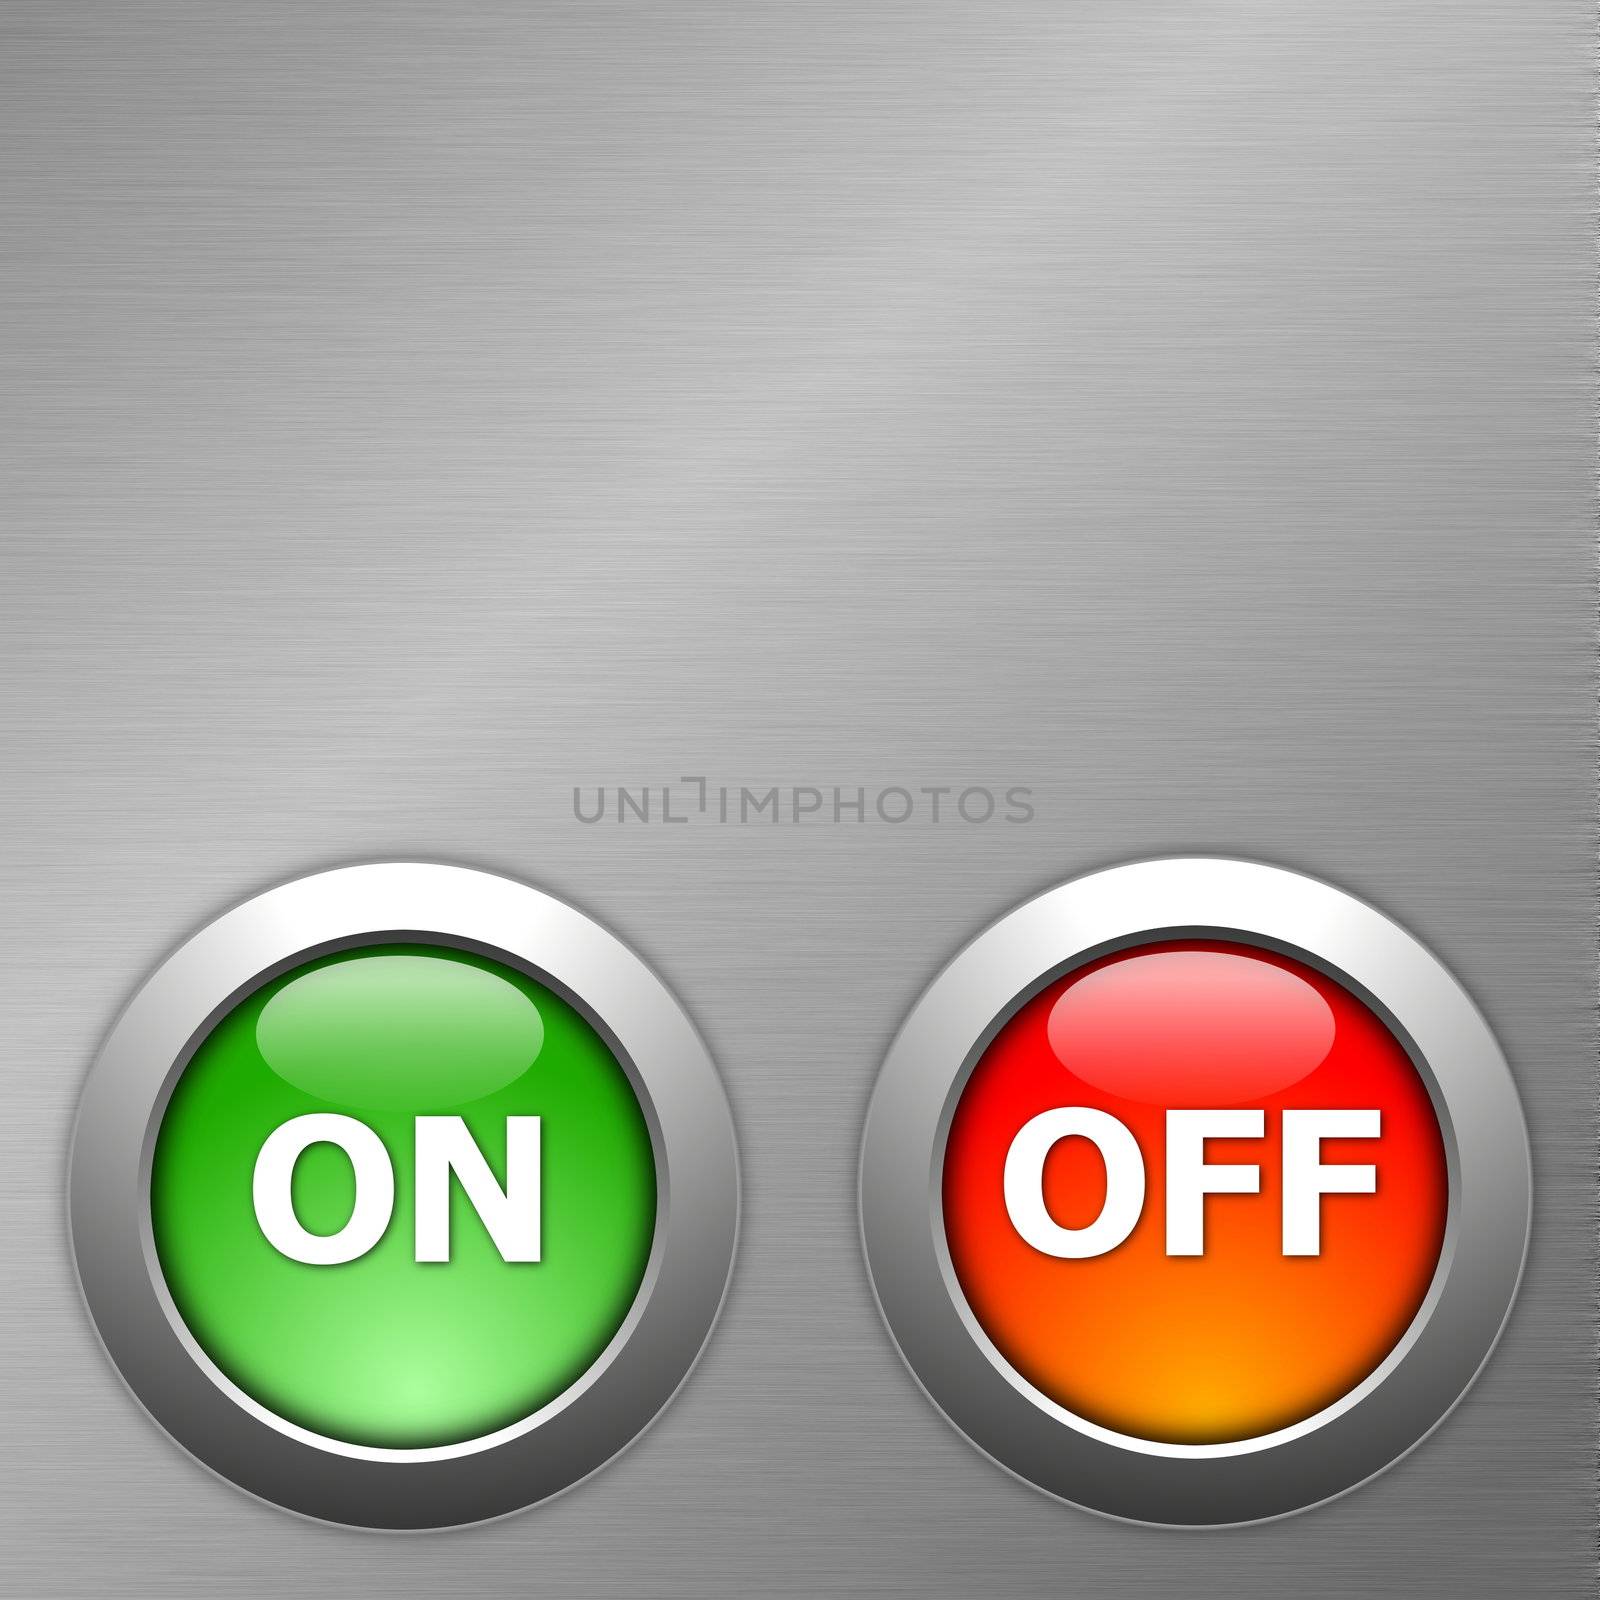 on and off button on metal background